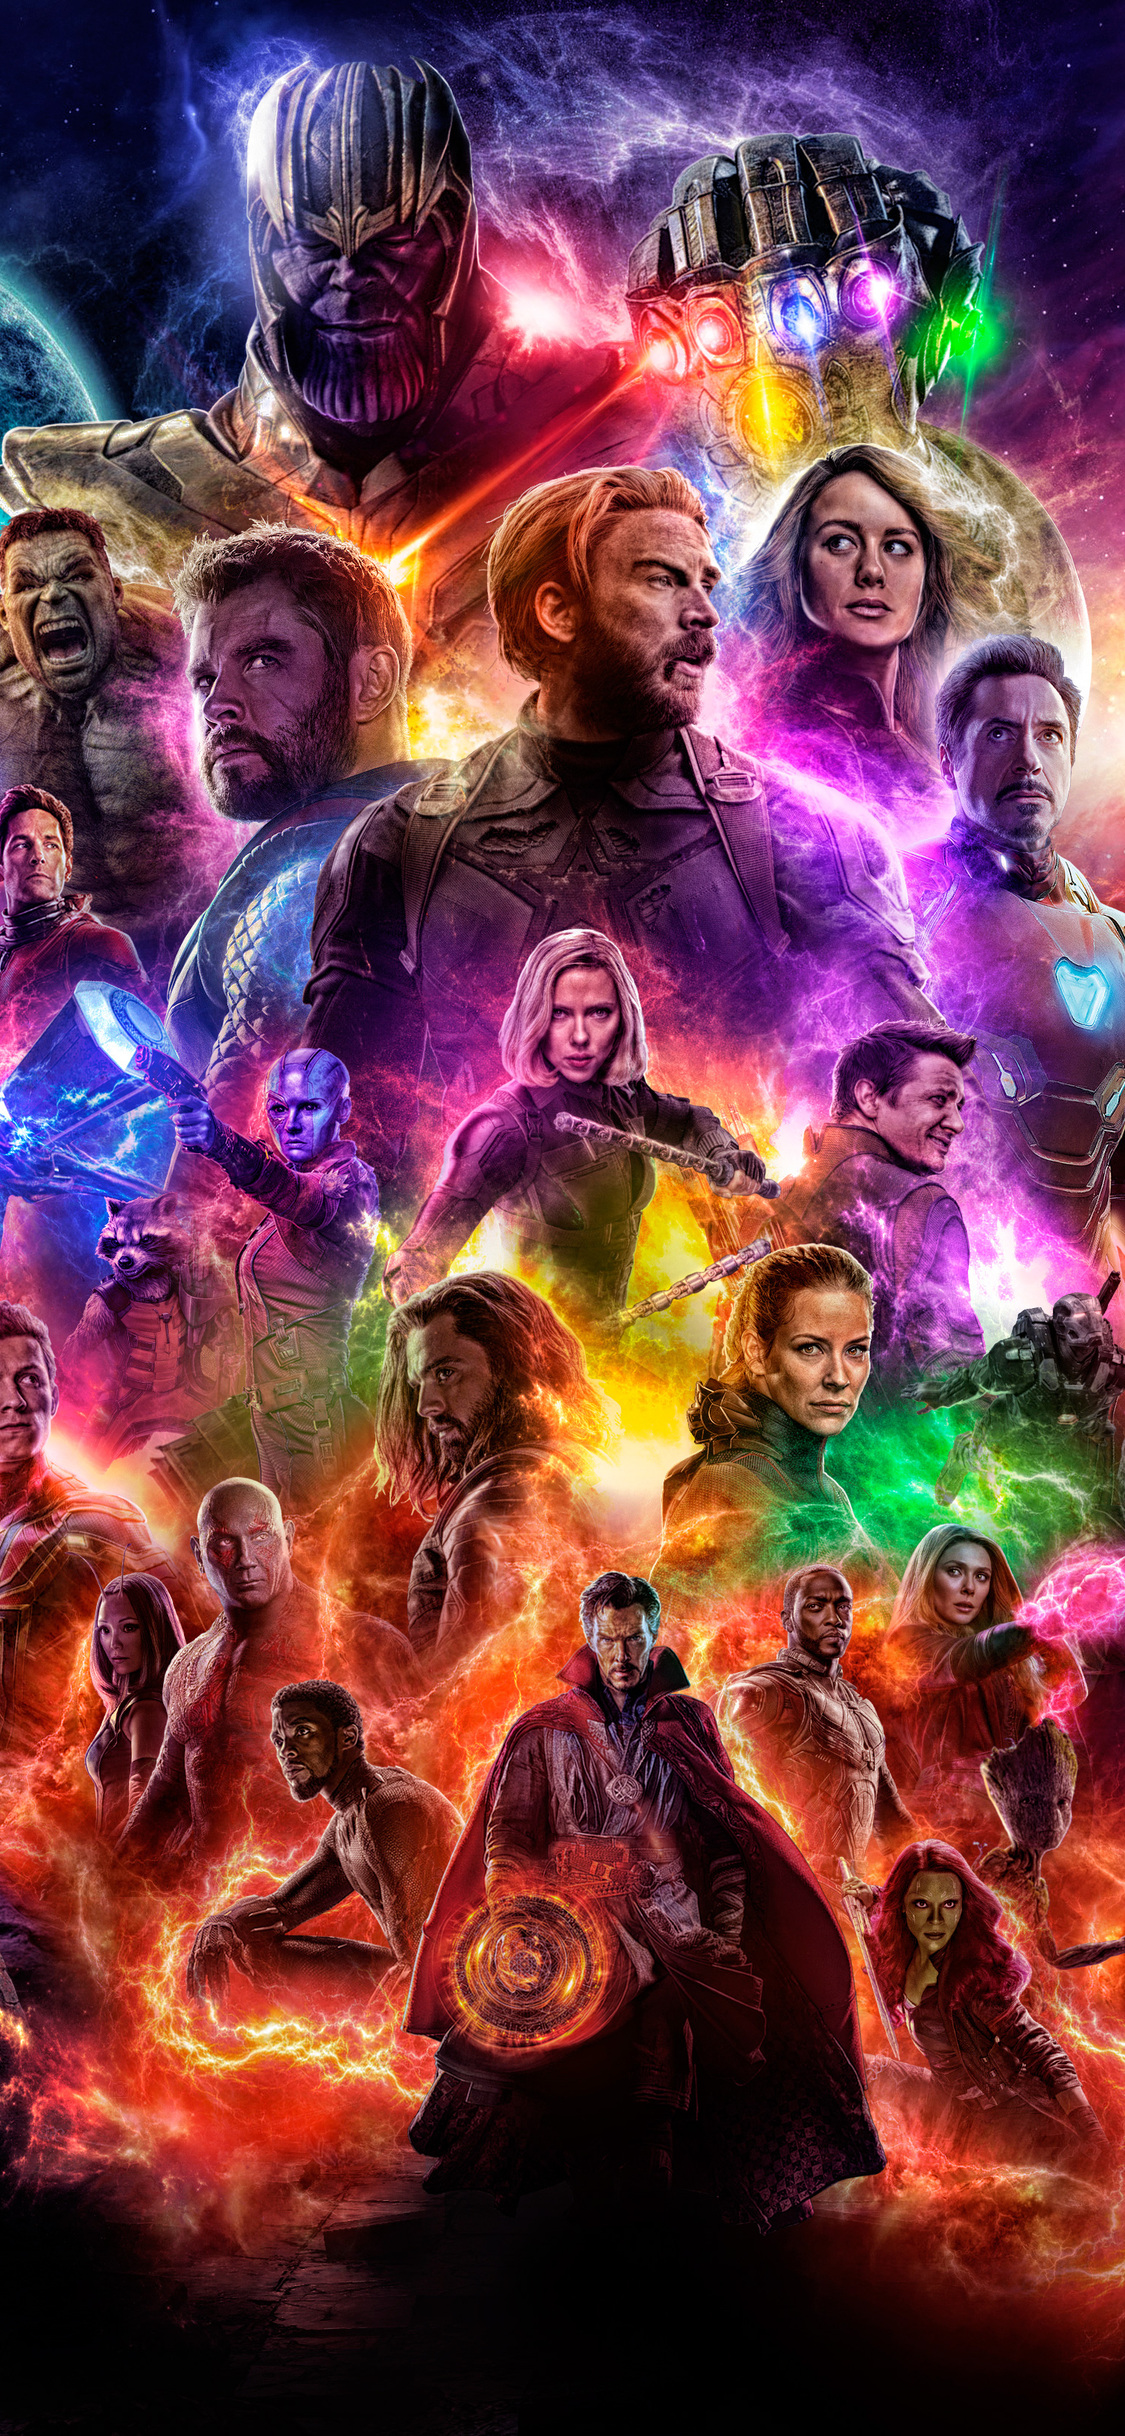 1125x2436 Avengers 4 End Game 2019 Iphone XS,Iphone 10 